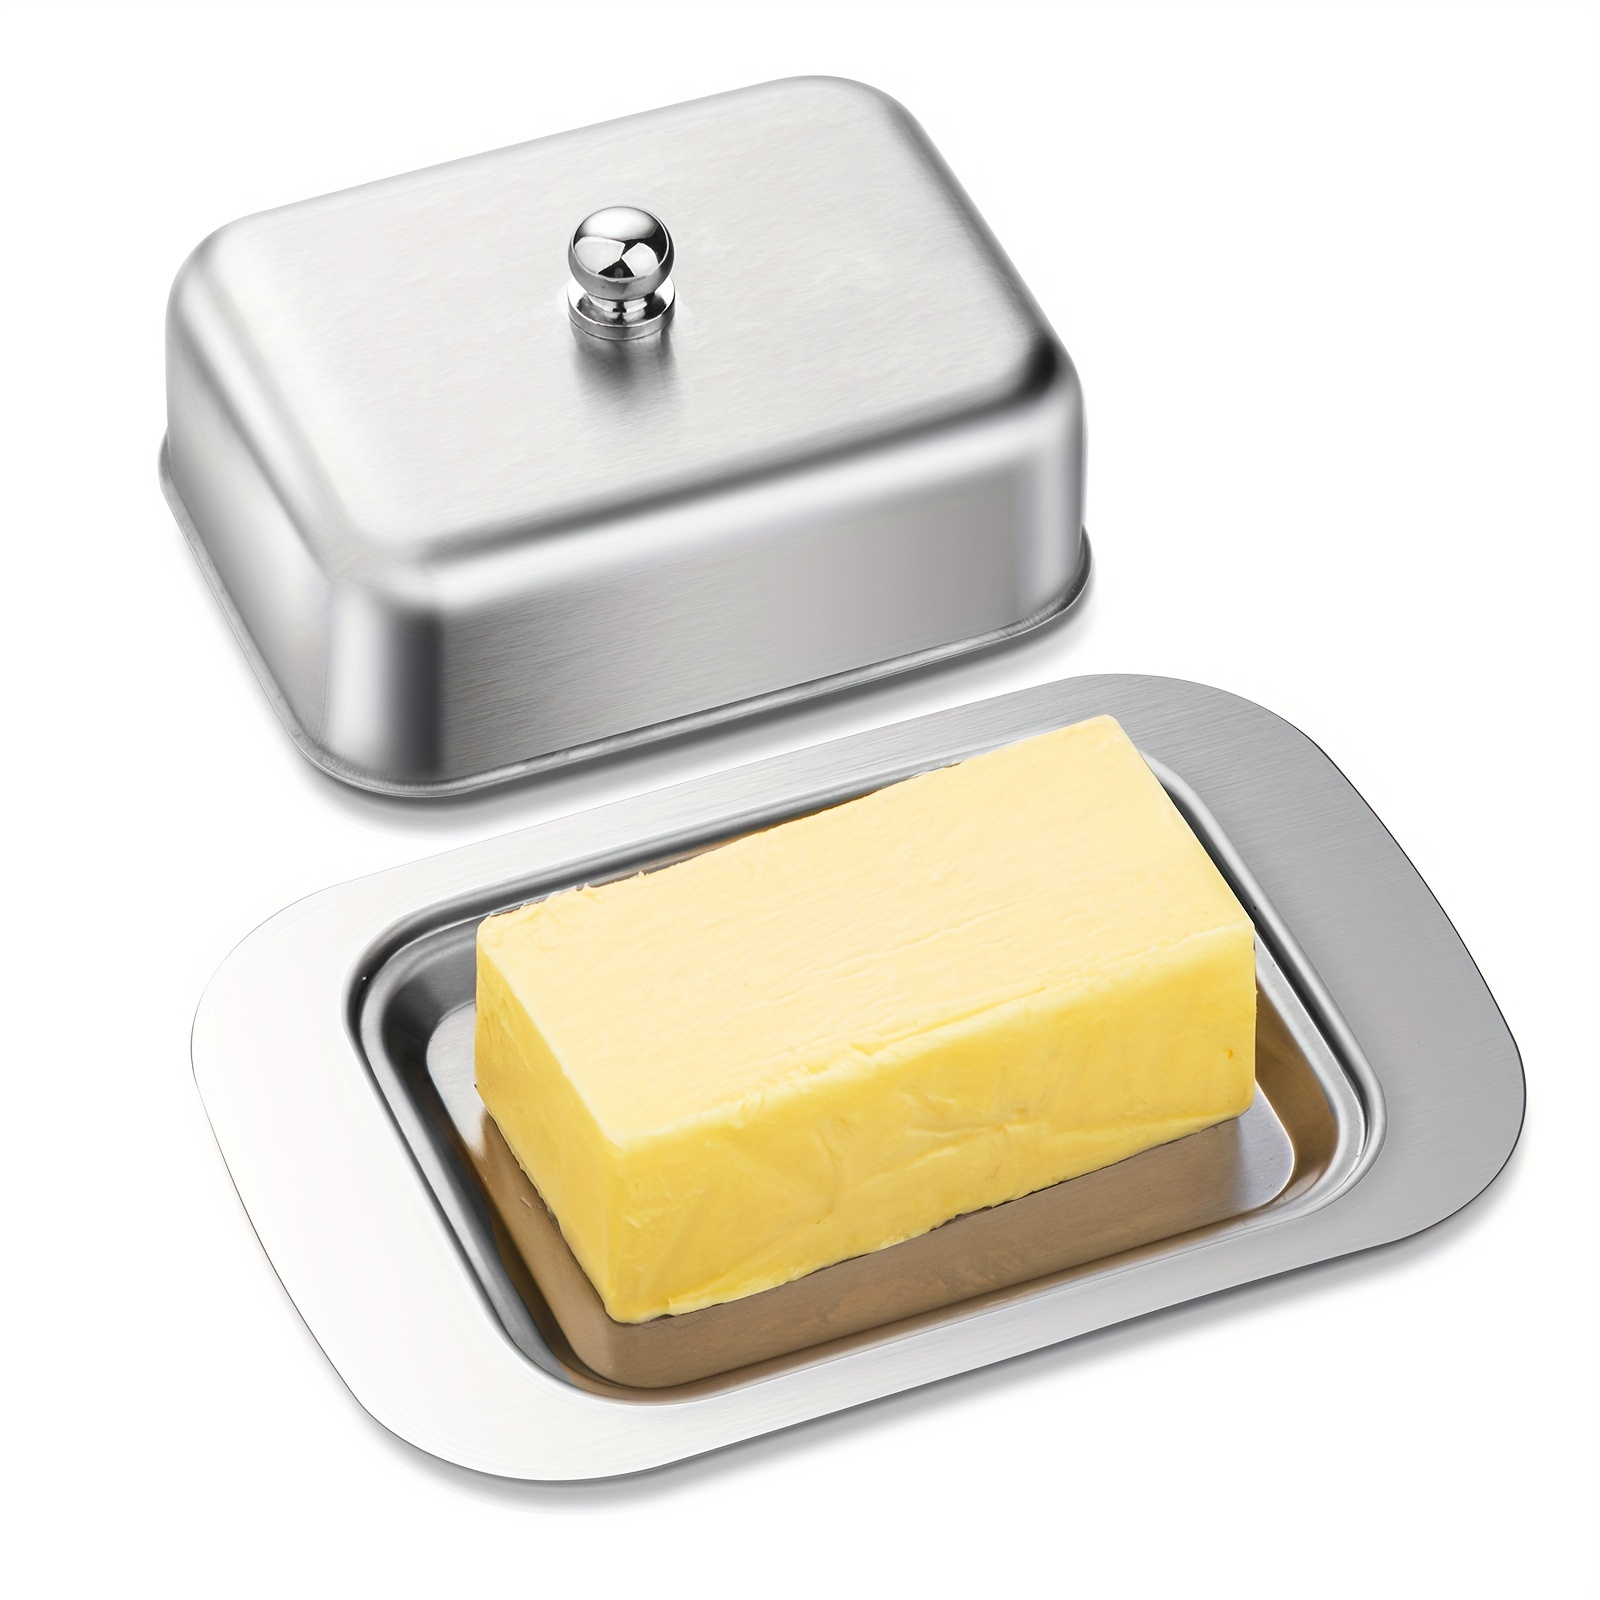 

1pc, Butter Box, Metal Butter Box, Stainless Steel Butter Saucer With Cover, Creative Butter Dish, Cheese Storage Box, Butter Keeper, Kitchen Stuff, Kitchen Gadgets